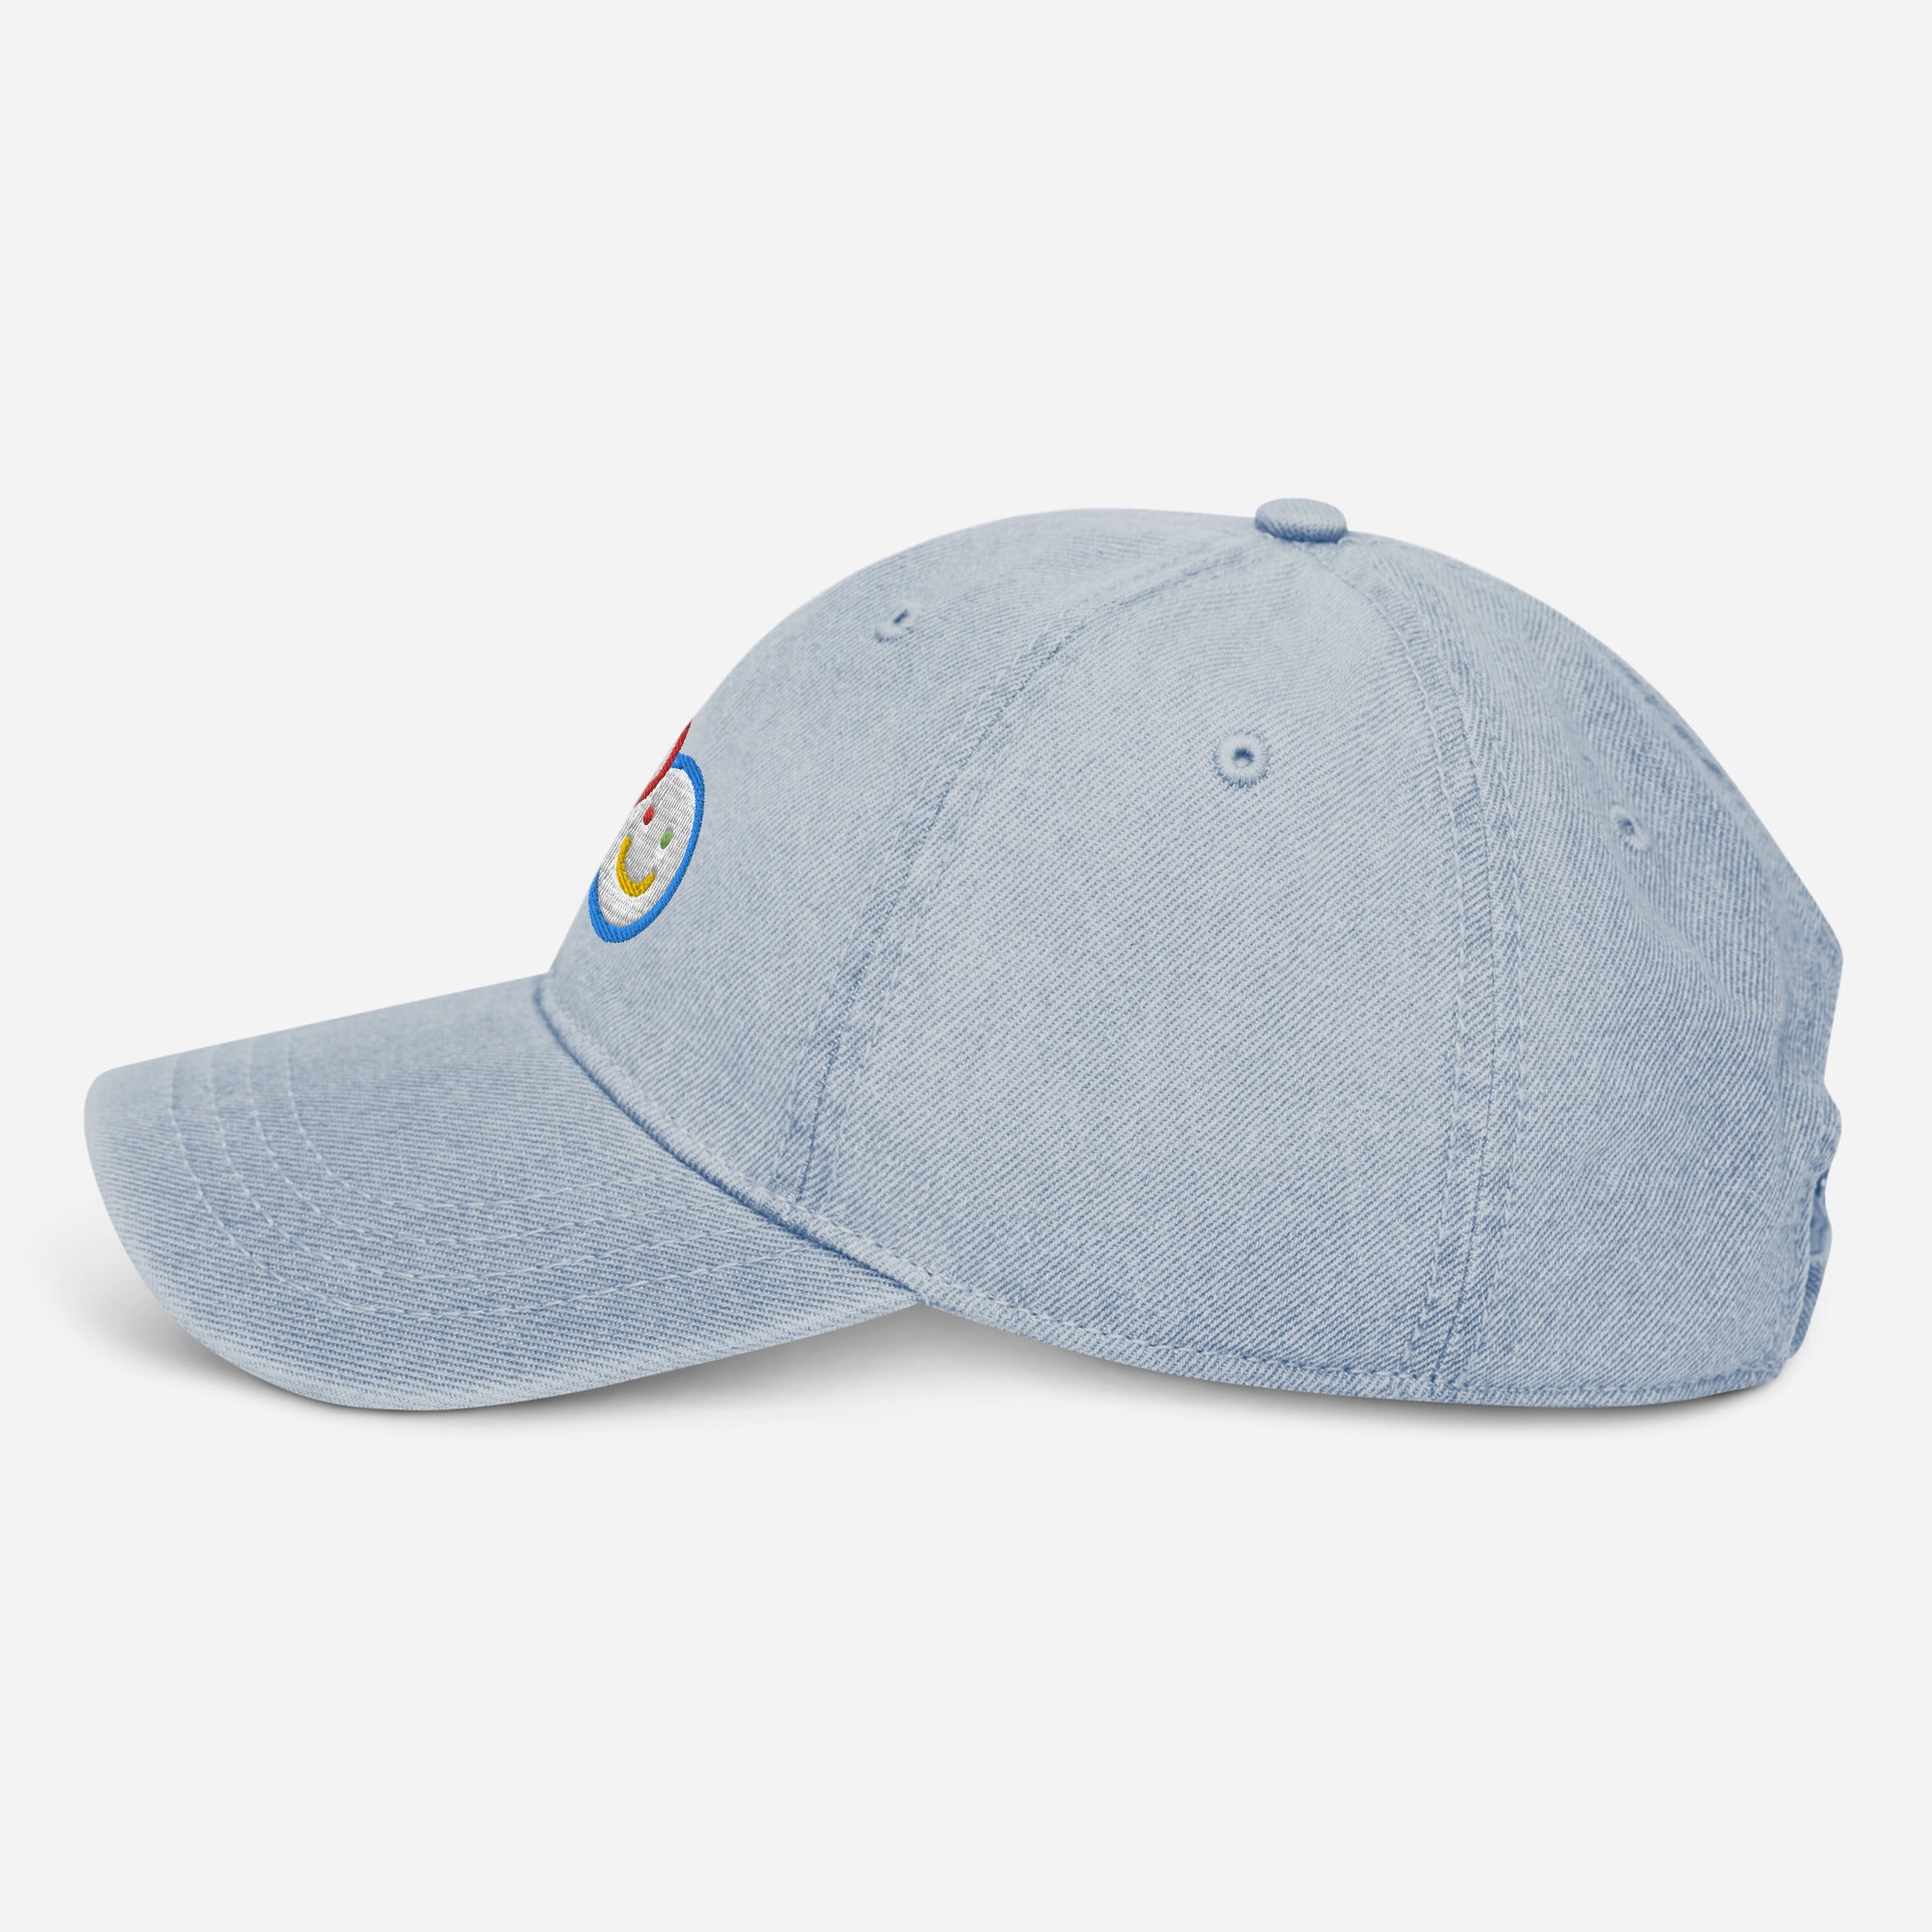 Colorblock Double Smileys Embroidered Denim Hat